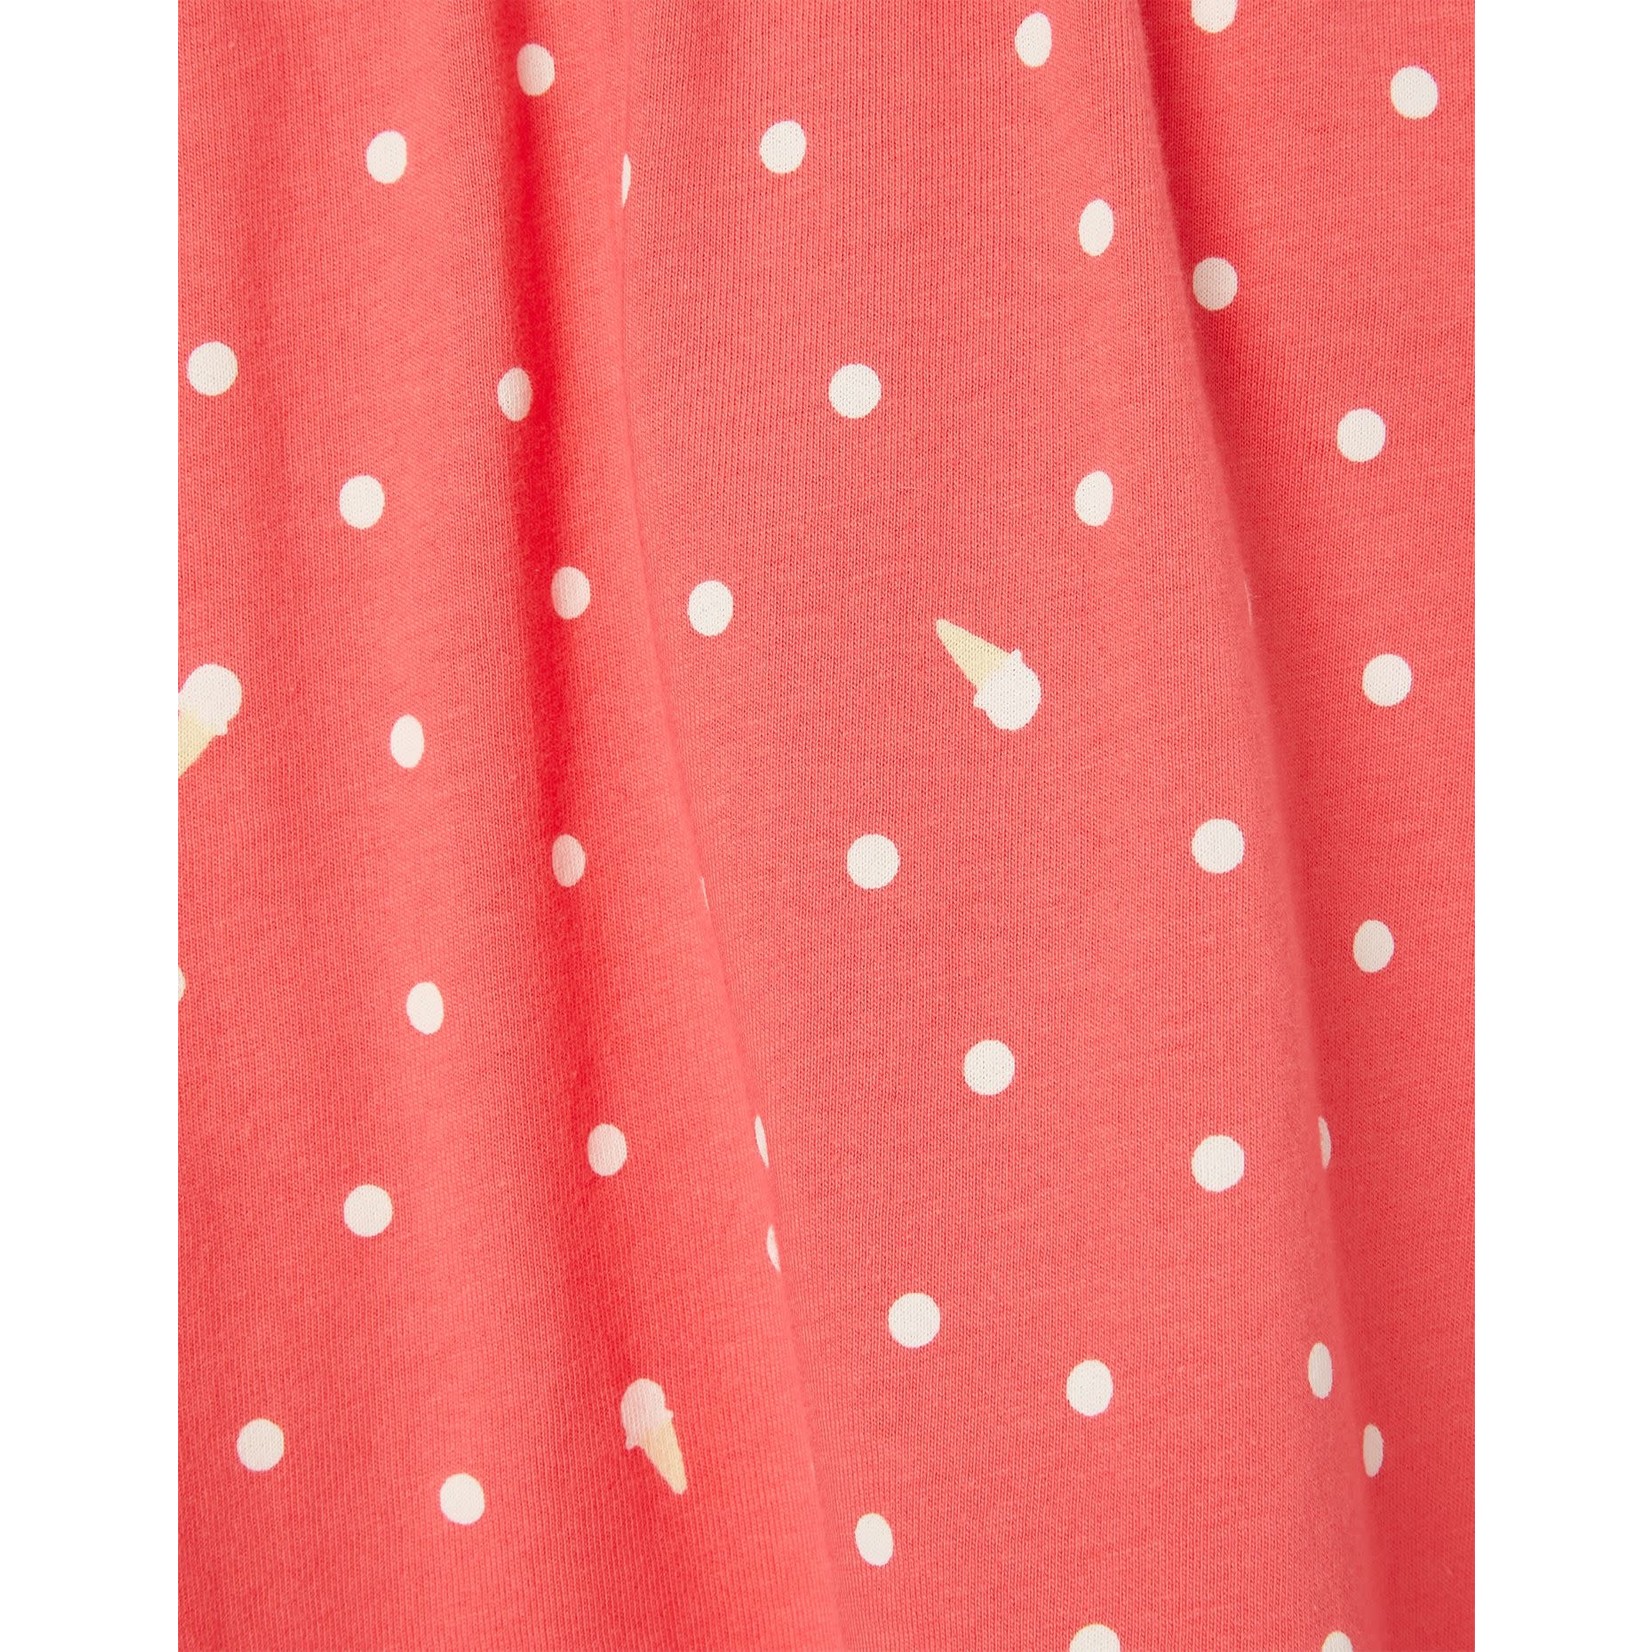 Joules JOULES - Pink Polka Dot Tank Top with Rainbow Straps 'Ivy'